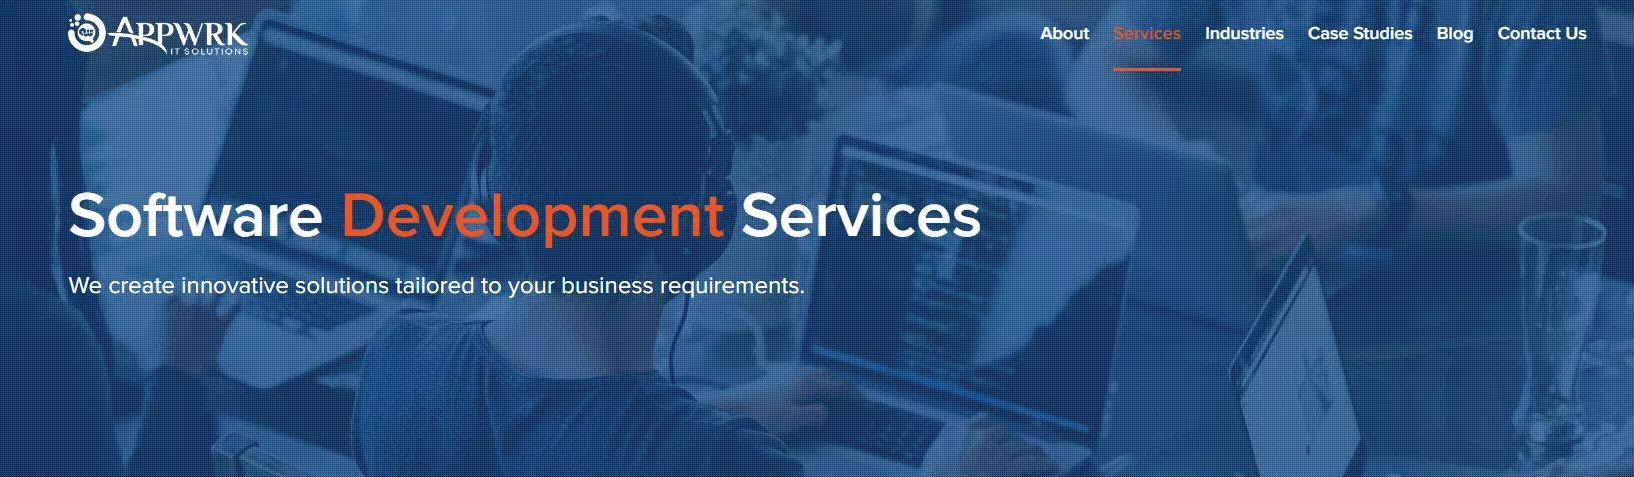 Different Kinds of Services Ionic App Development Company - APPWRK Offers